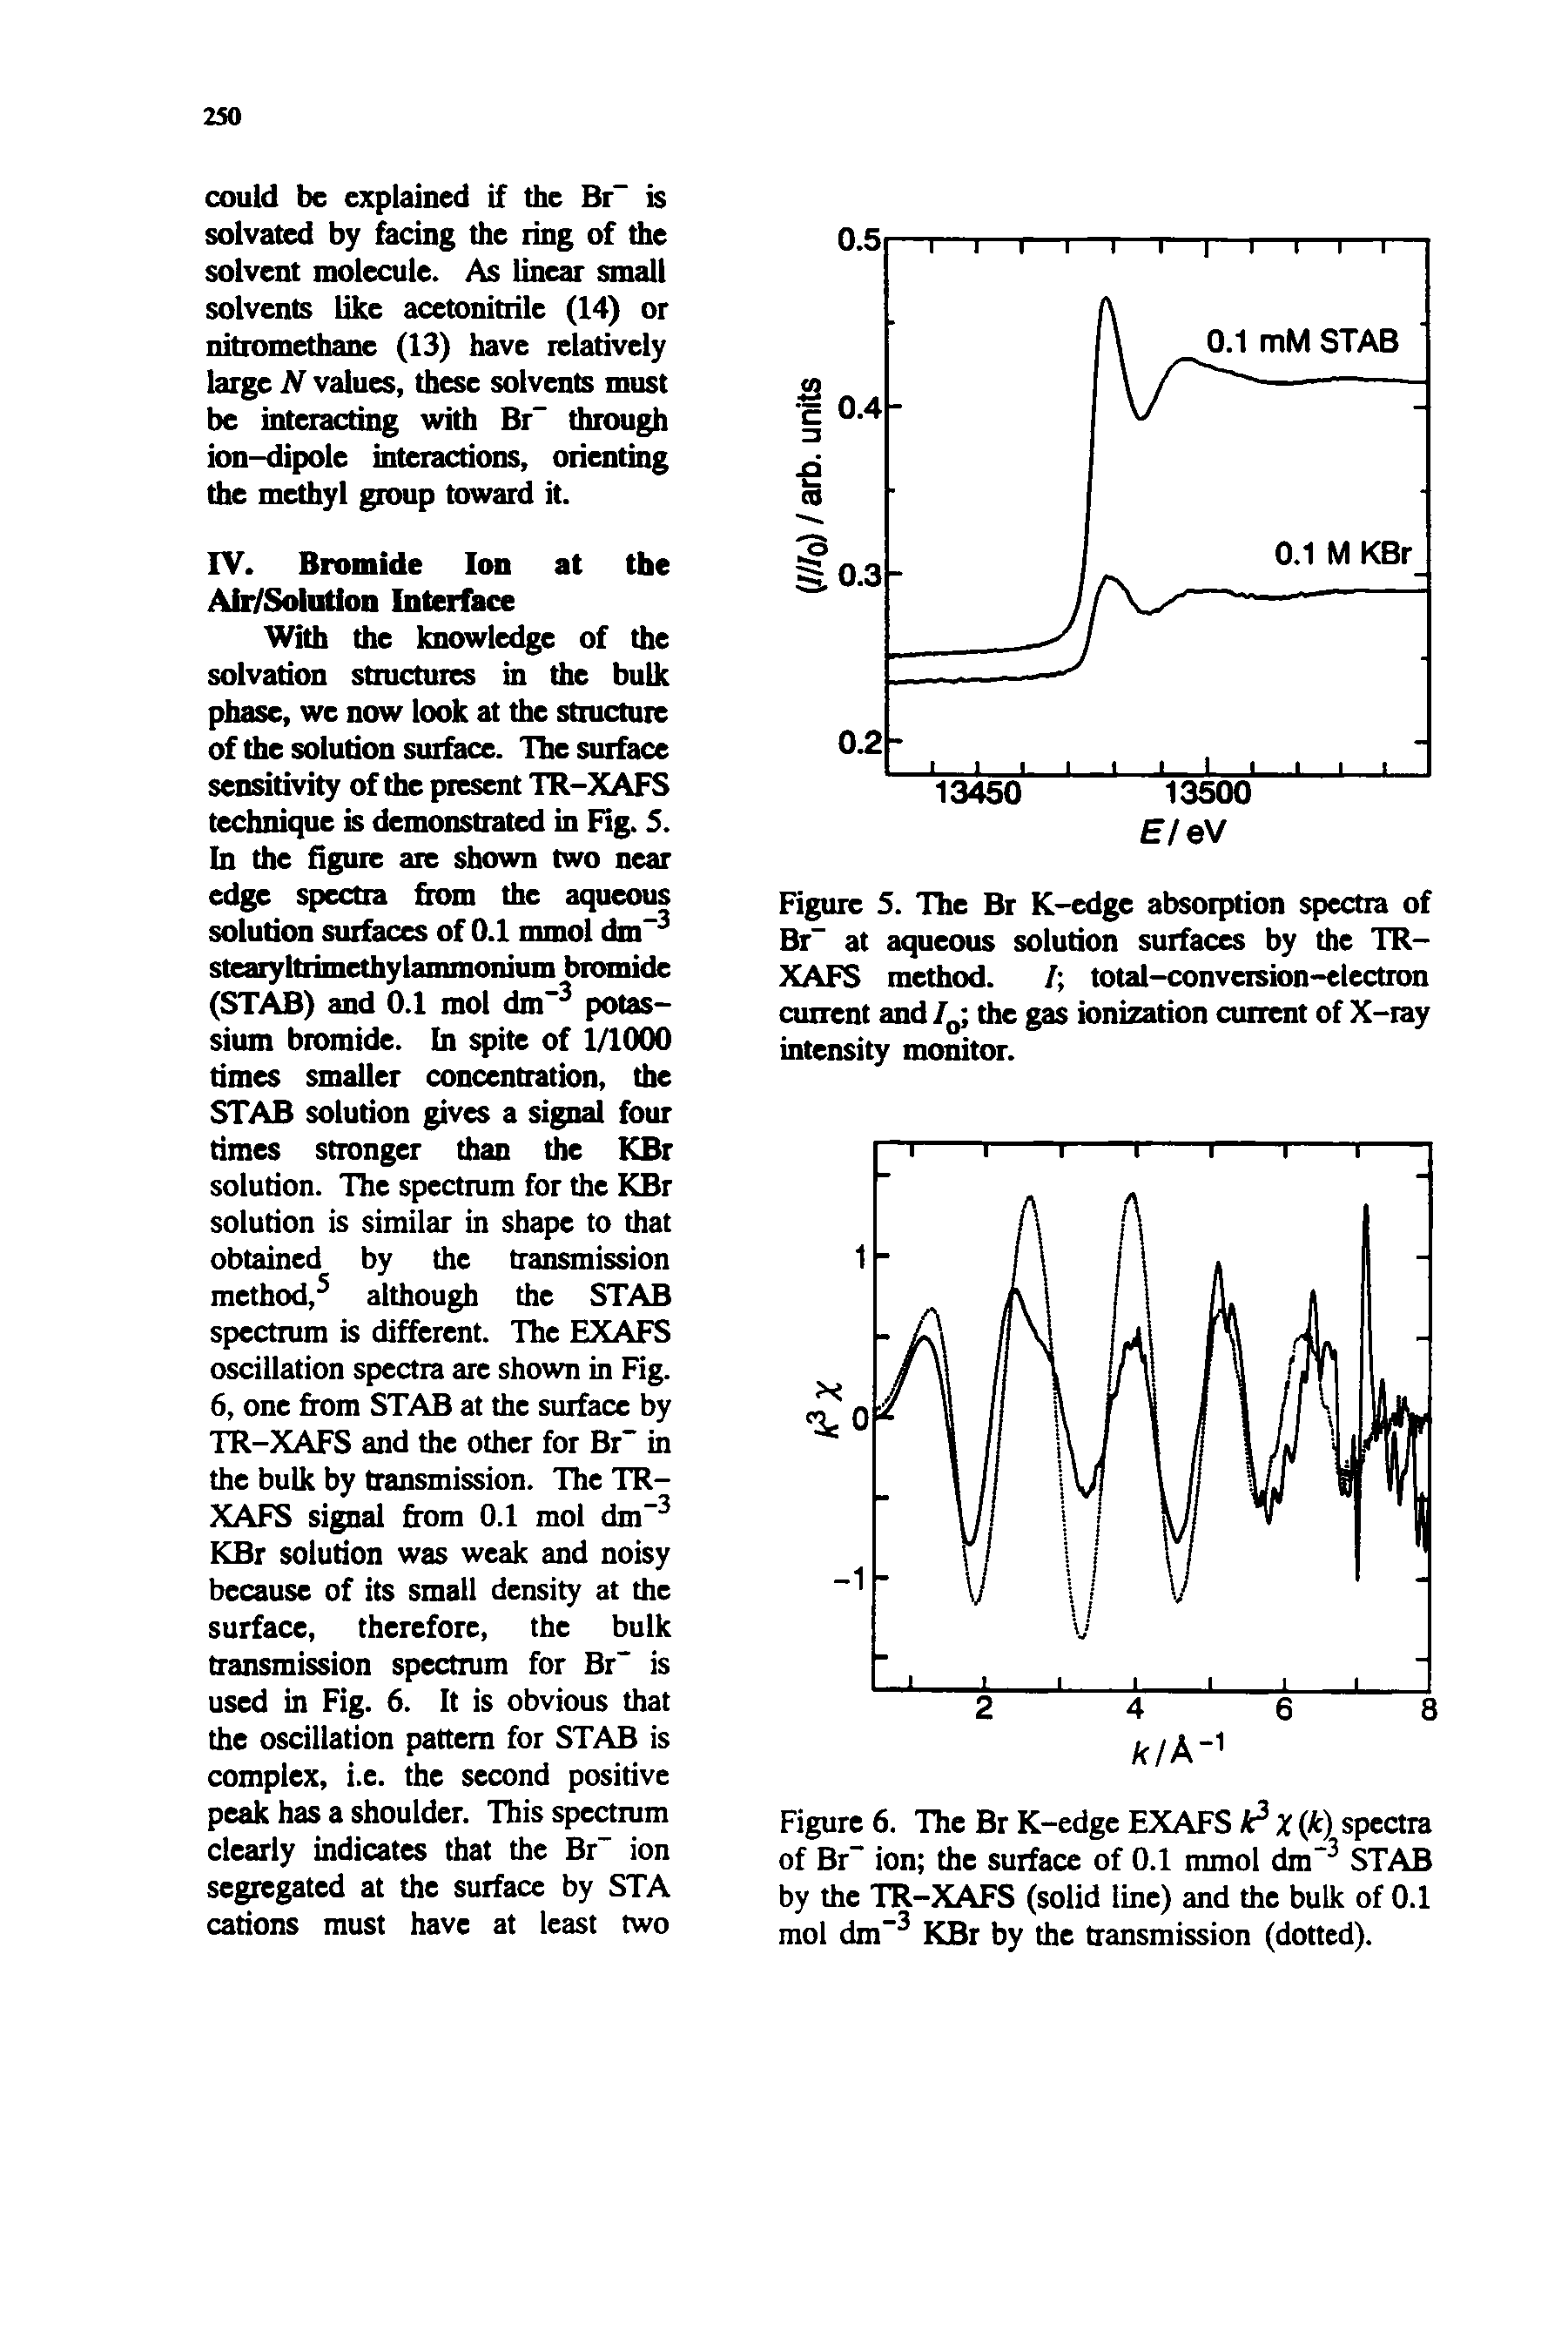 Figure S. The Br K-edge absorption spectra of Br at aqueous solution surfaces by the TR-XAFS method. / total-conversion-electron current and / the gas ionization current of X-ray intensity monitor.